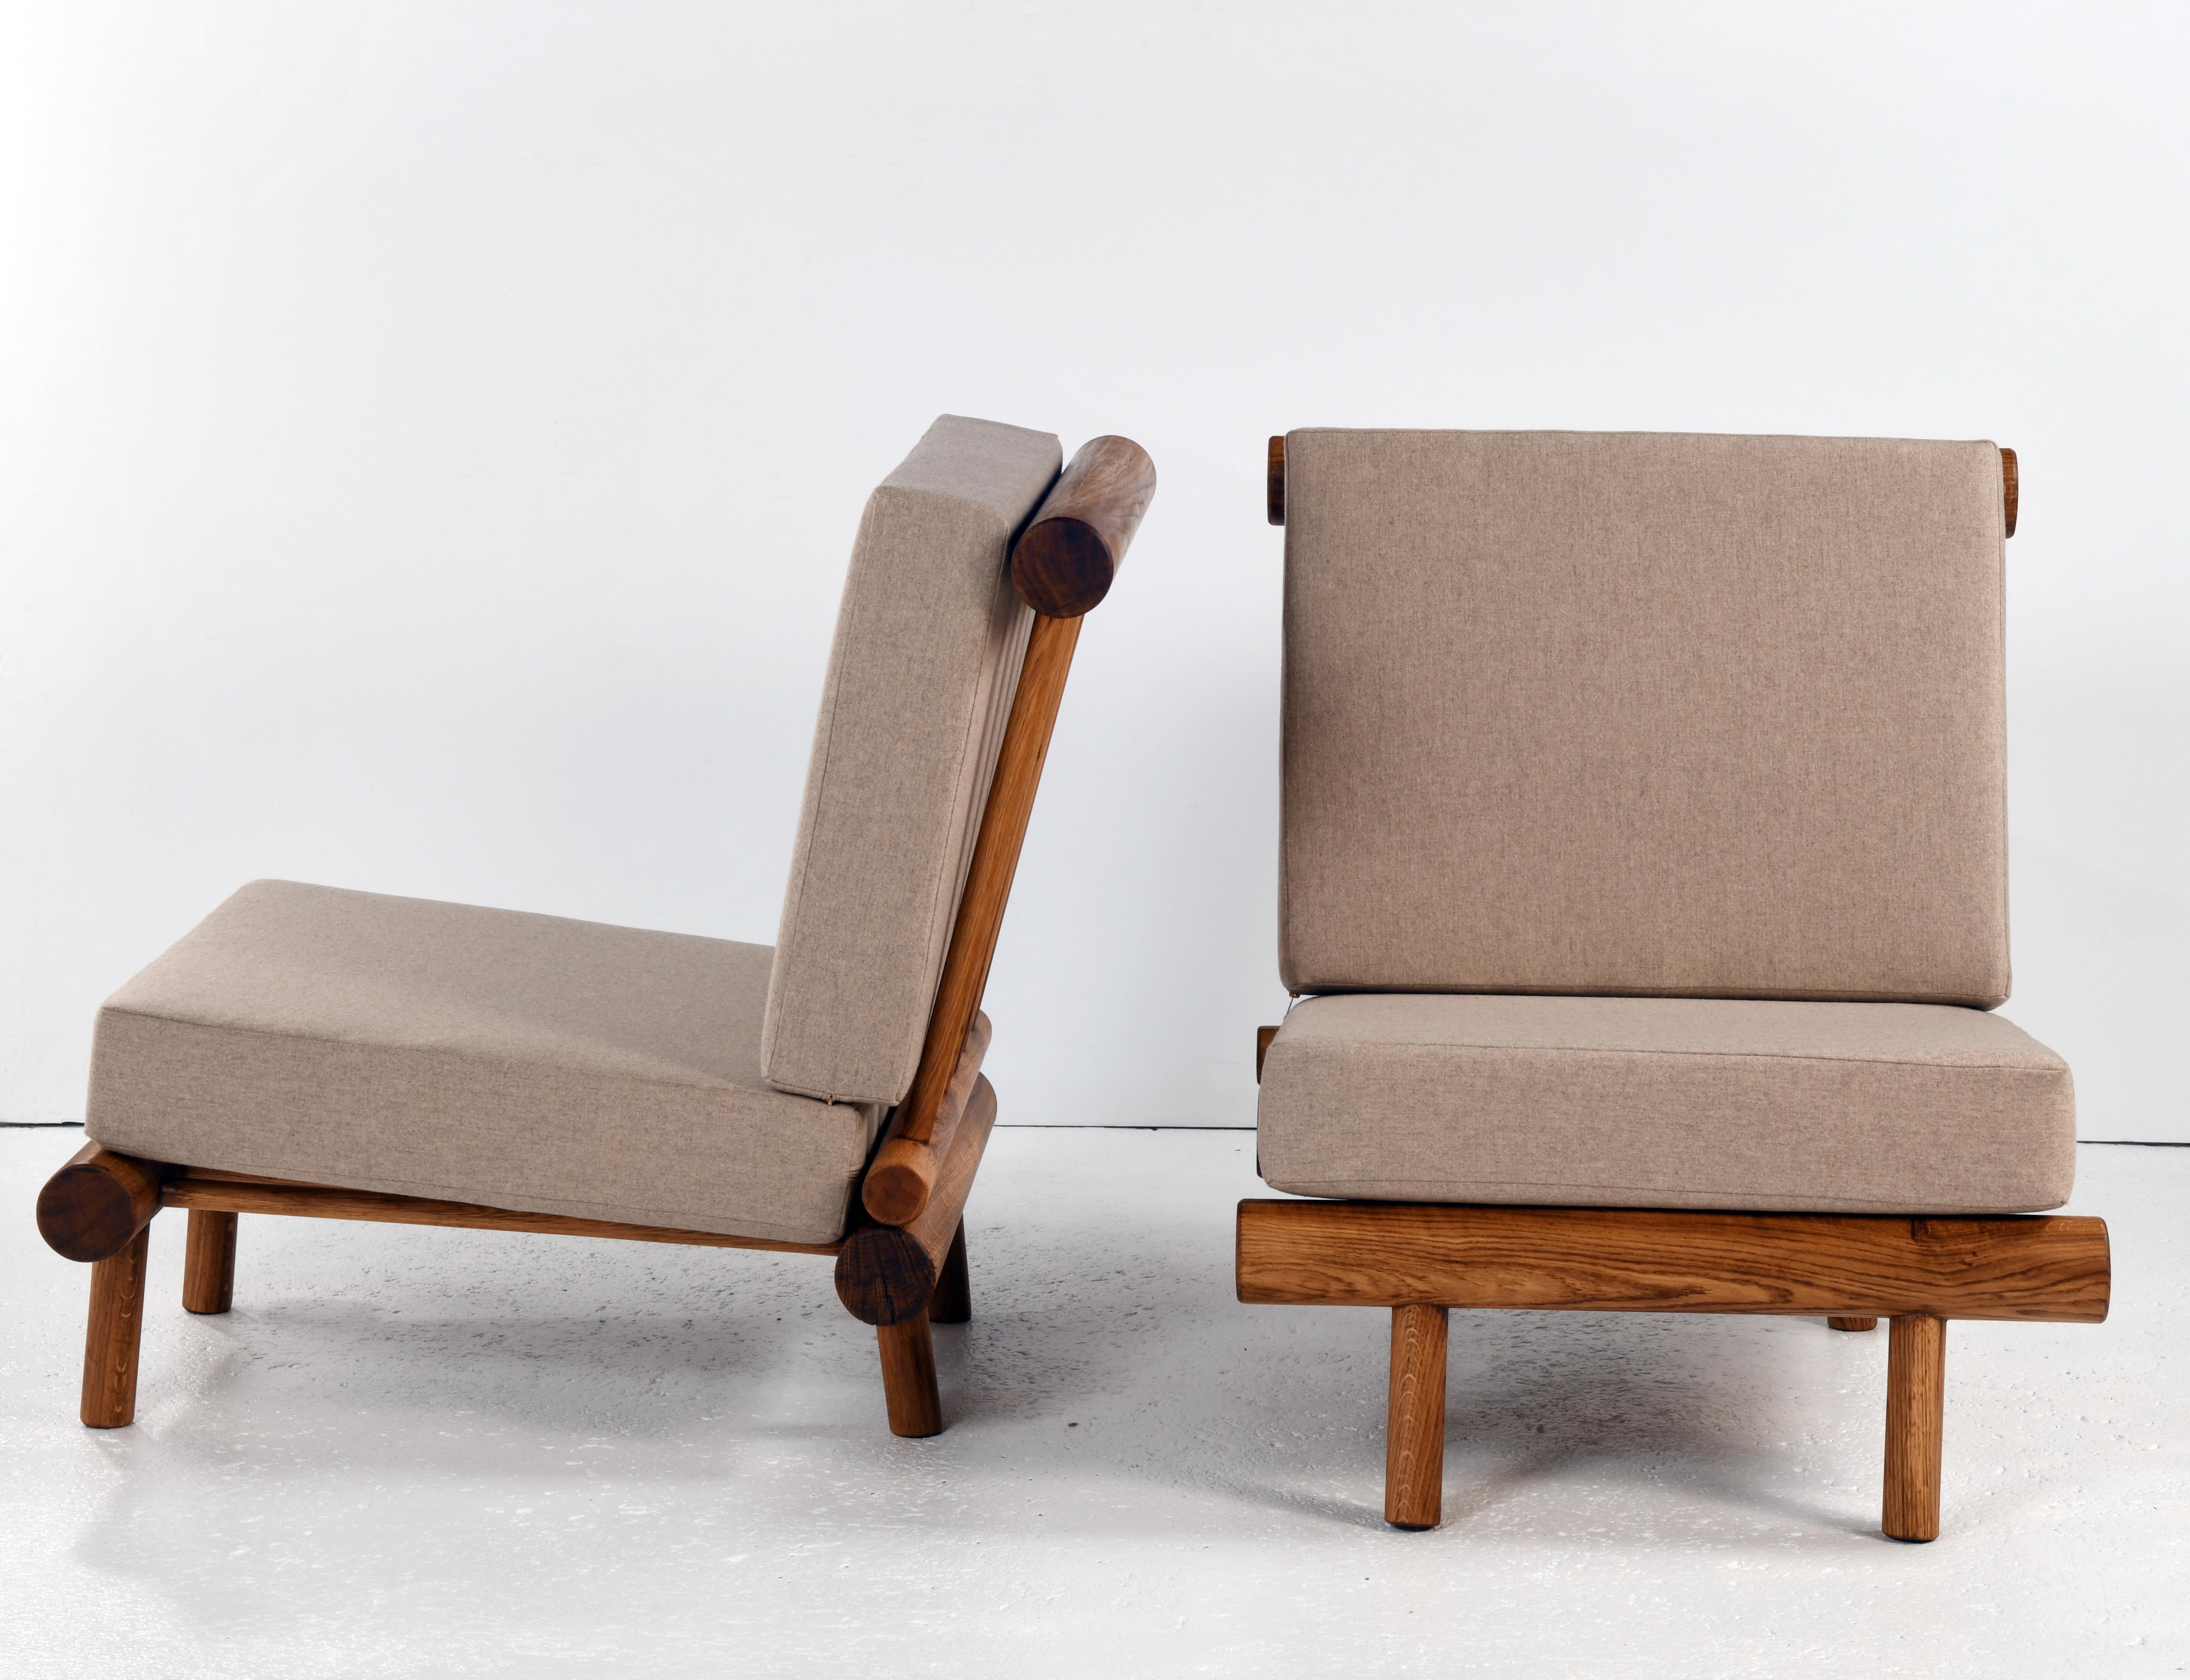 Wool Pair of oak fireside chairs called La cachette, attributed to Charlotte Perriand